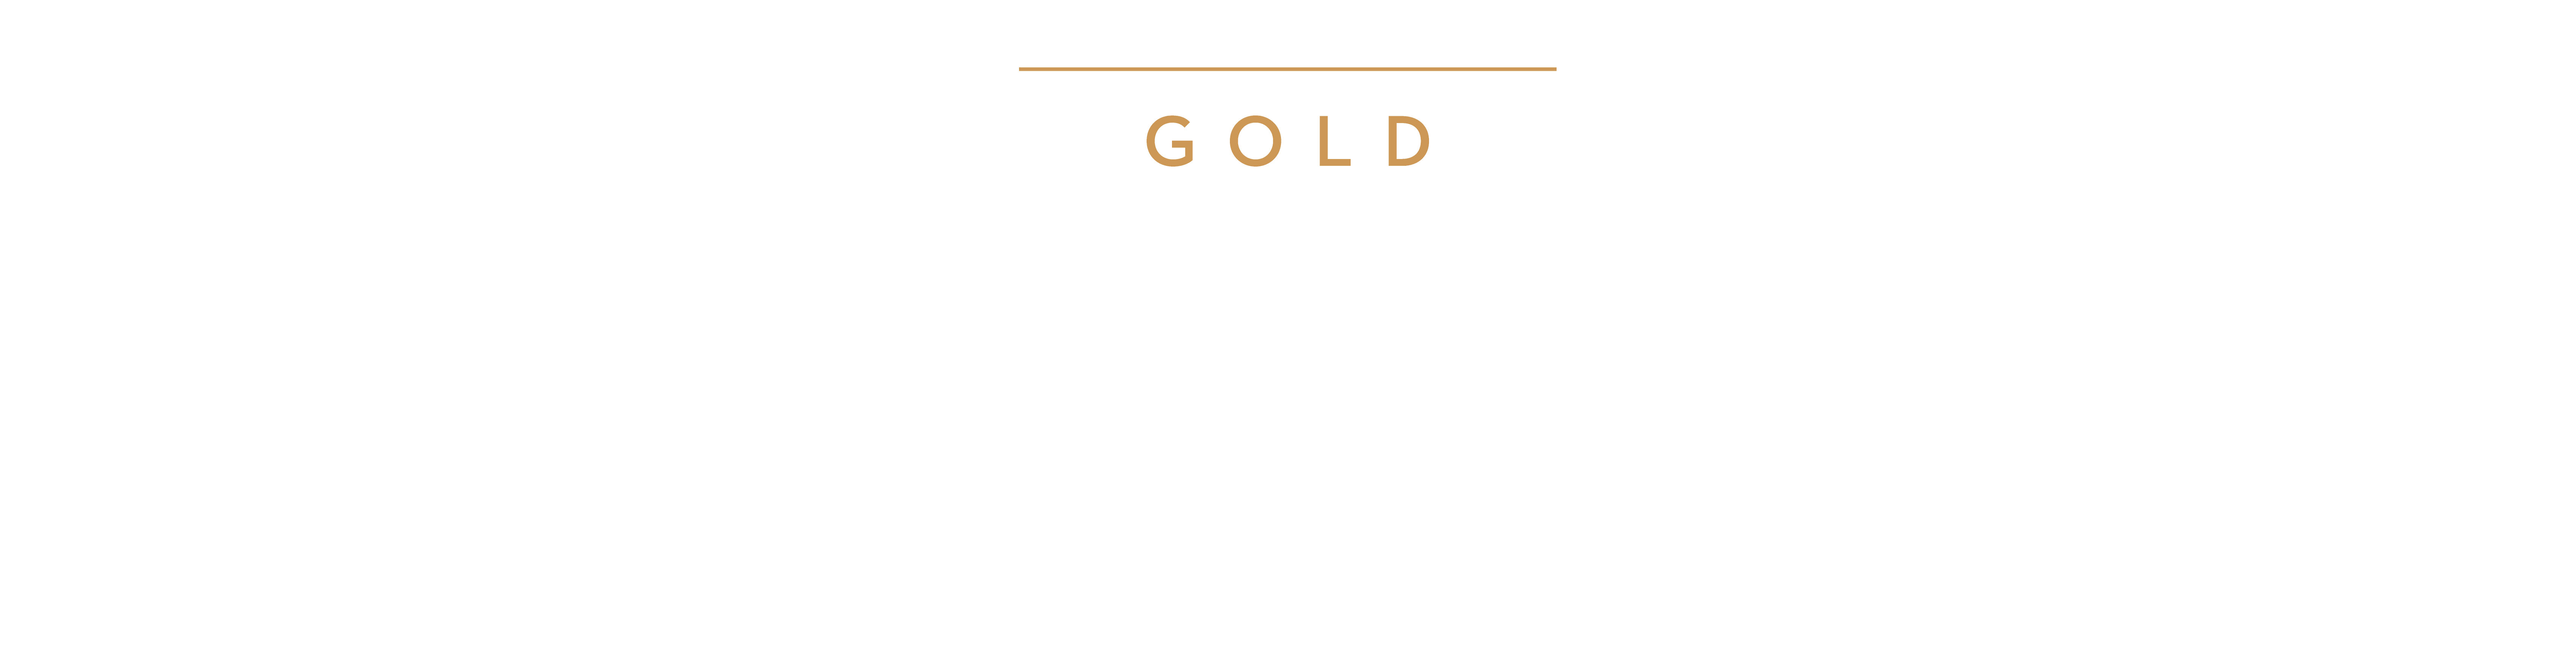 Gold: ABBOTT I ACADIA REALTY TRUST AND PARKSIDE REALTY INC I ALLSTATE INSURANCE COMPANY | BOEING
CALAMOS INVESTMENTS I
THE CHICAGO COMMUNITY TRUST | EXELON | MARK HOPLAMAZIAN AND RACHEL KOHLER
ITW | LINK LOGISTICS | ANTHONY F. MAGGIORE, JPMORGAN CHASE | MARMON HOLDINGS, INC.
MCDONALD's CORPORATION | NICOR GAS | NORTHERN TRUST | NORTHWESTERN MEDICINE | PEPSICO | PNC
PRITZKER TRAUBERT FOUNDATION SIDLEY AUSTIN LLP | TULLY & ASSOCIATES I UL SOLUTIONS
VALOR EQUITY PARTNERS | WILLKIE FAR & GALLAGHER LP | WYNNDALCO ENTERPRISES, LLC.